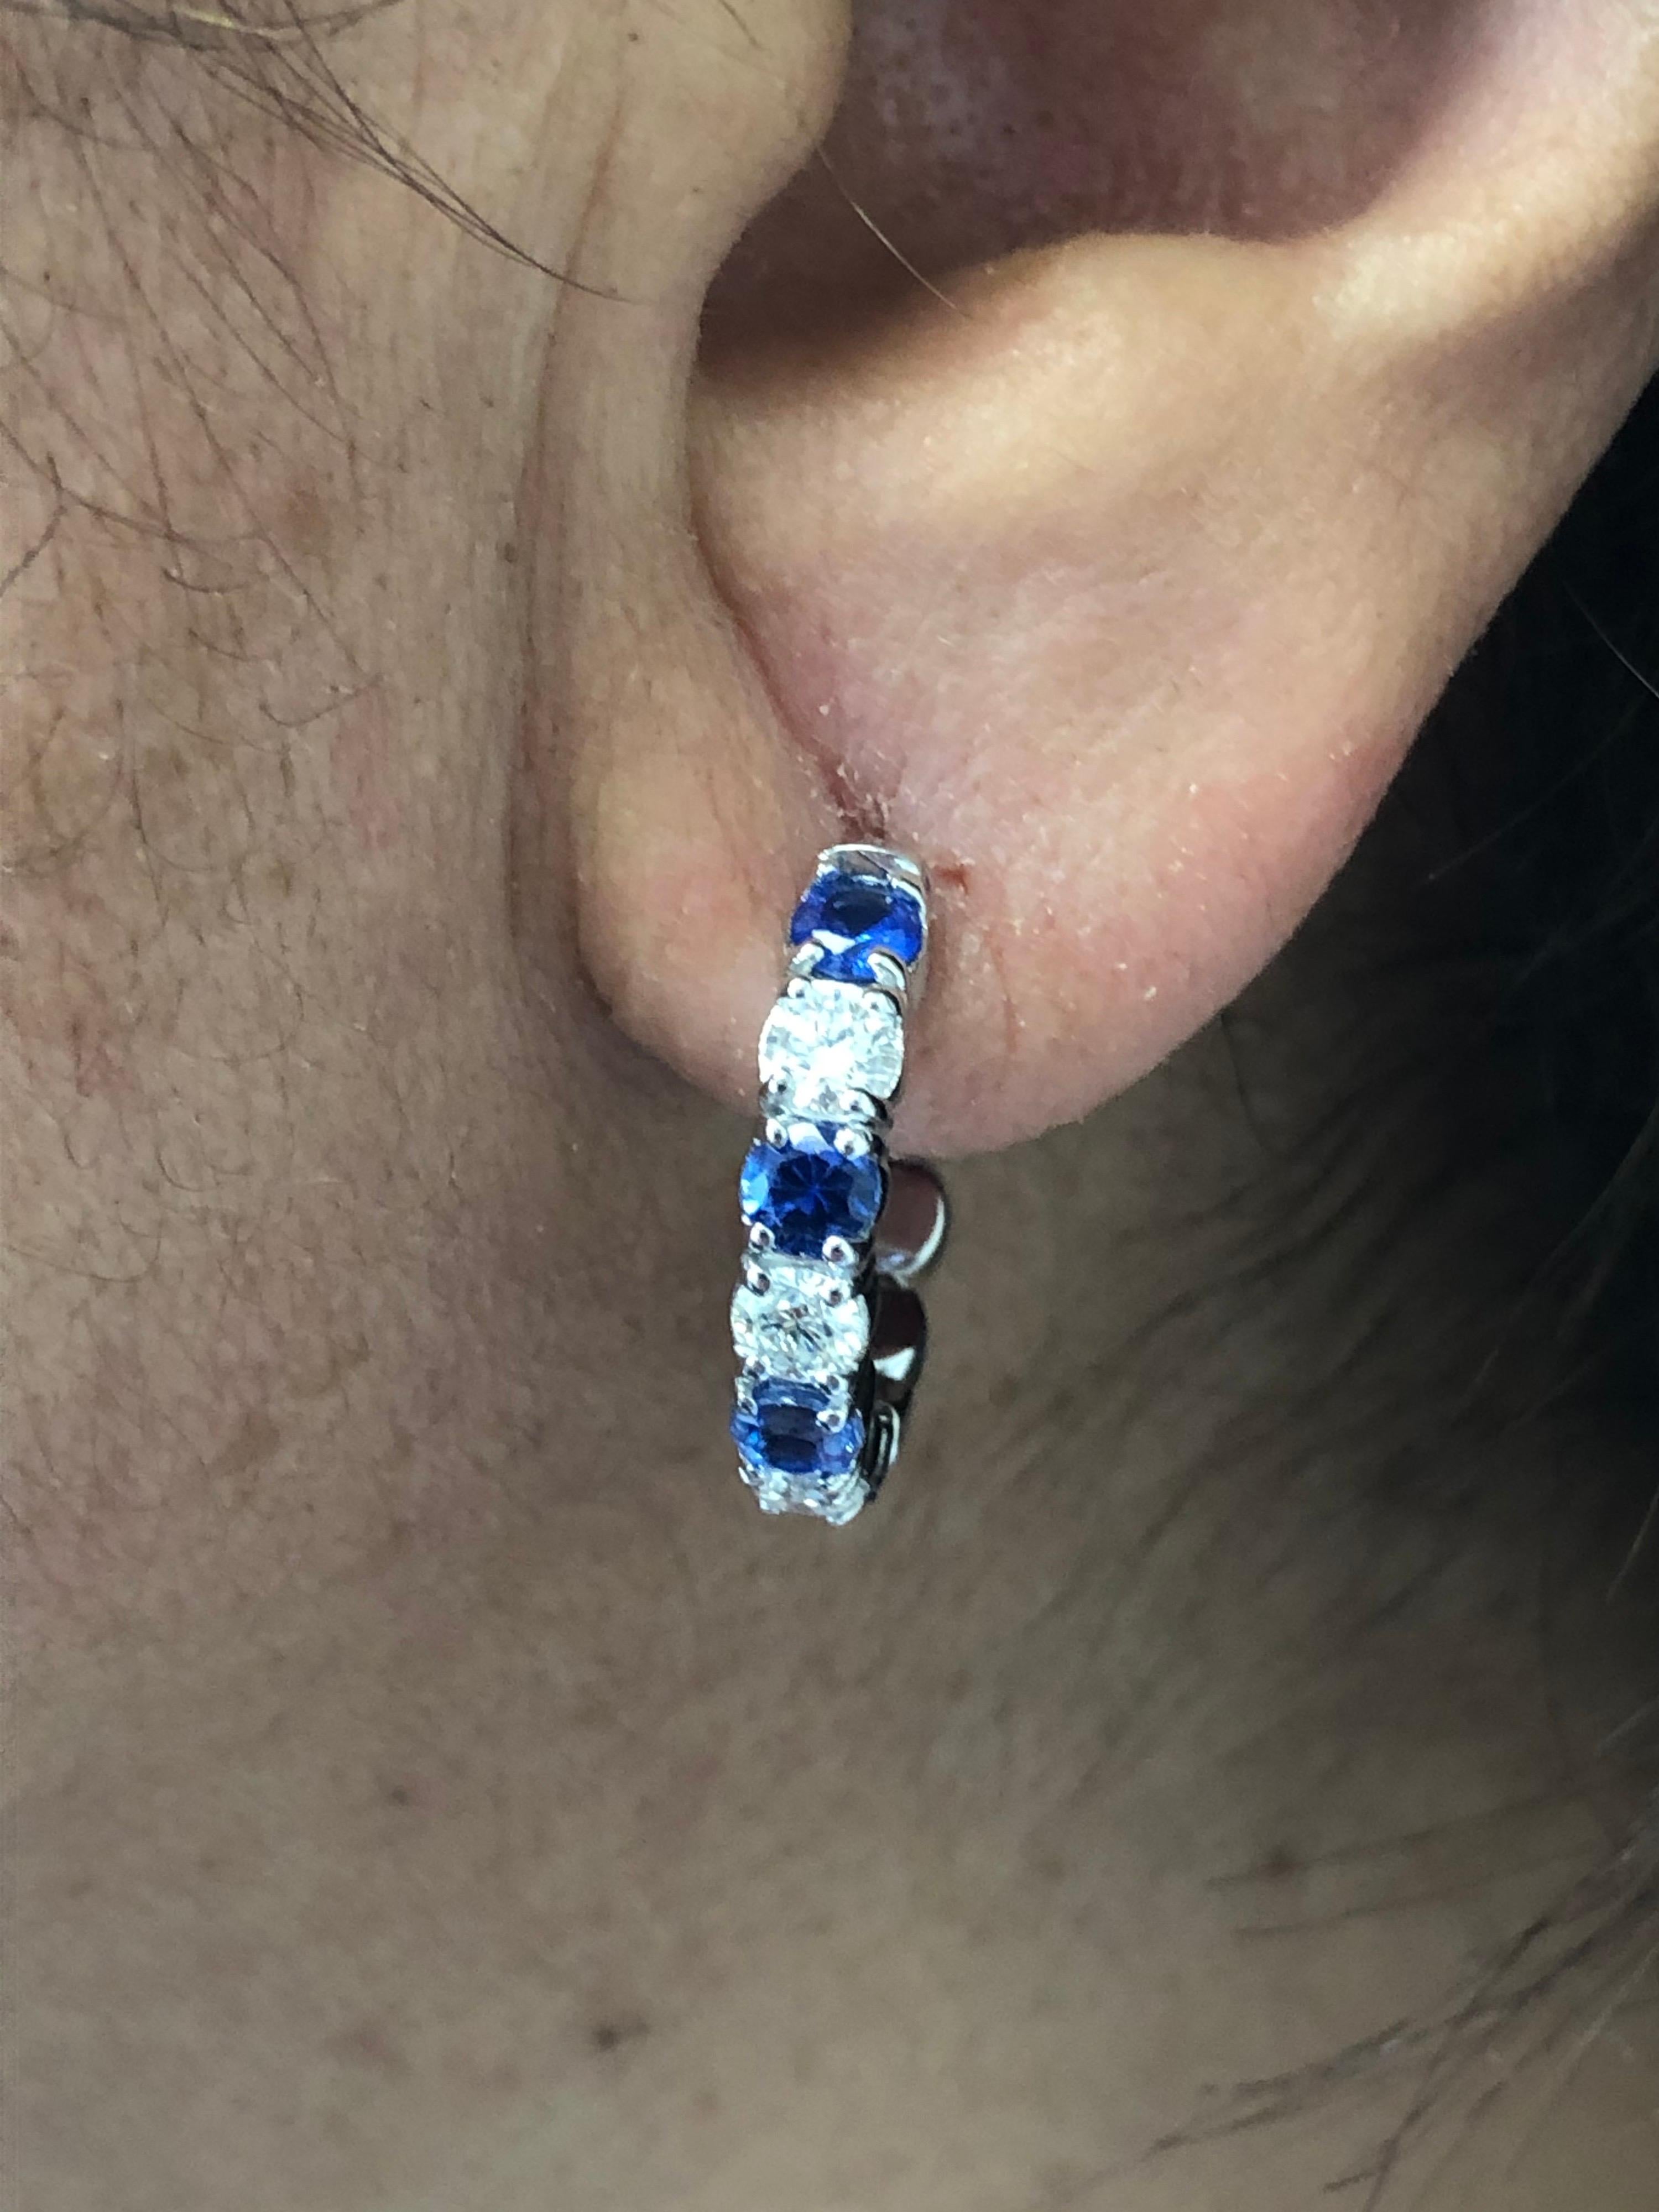 Sapphire and Diamond stones set in 14K white gold. The stones are set only on the outside of the hoop. The earrings are set with 8 sapphires and 6 diamonds. The sapphire weight is 1.73 carats and the diamond weight is 1.20 carats. The sapphires are